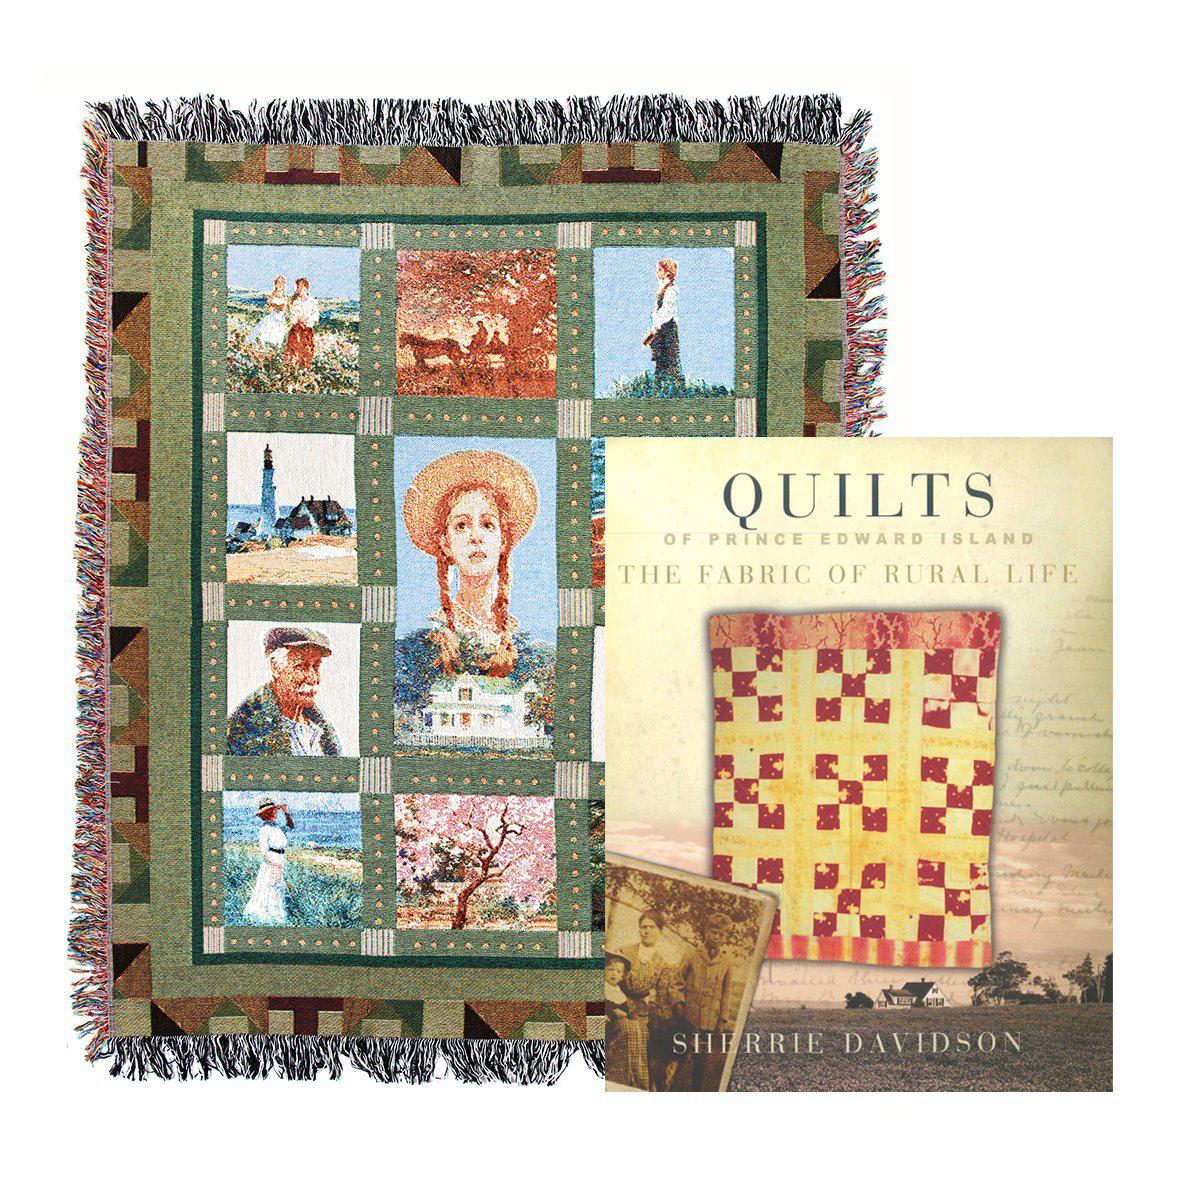 Anne Inspired Blanket & PEI Quilt Coffee Table Book